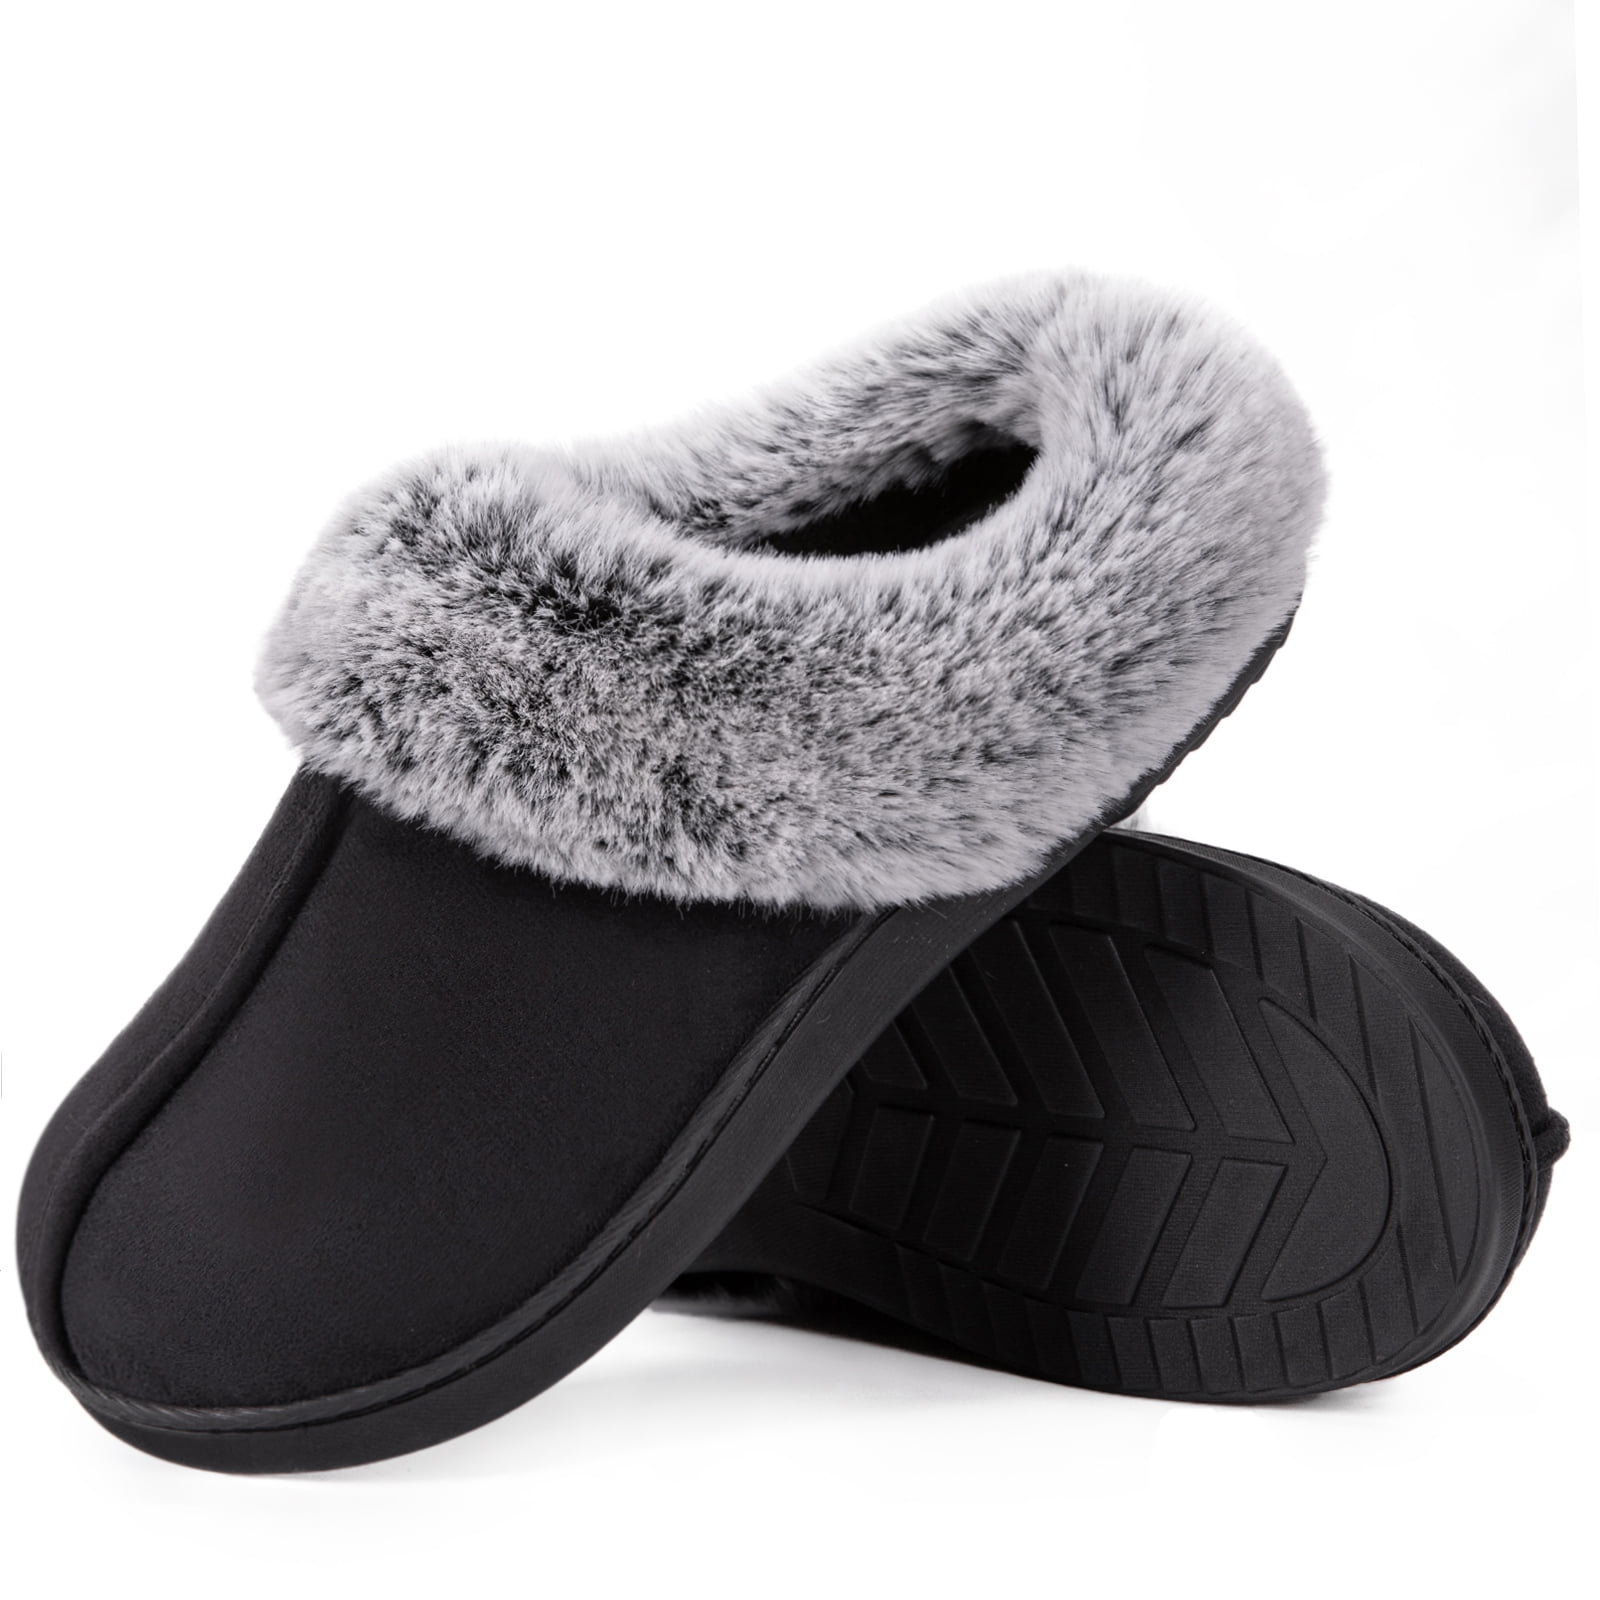 HomeTop Women s Classic Microsuede Memory Foam Slippers Durable Rubber Sole with Warm Faux Fur Collar 091664b5 bc46 4cf8 9236 150d8dbe15fe.f1598371a0d1e8756d0a95368f173389